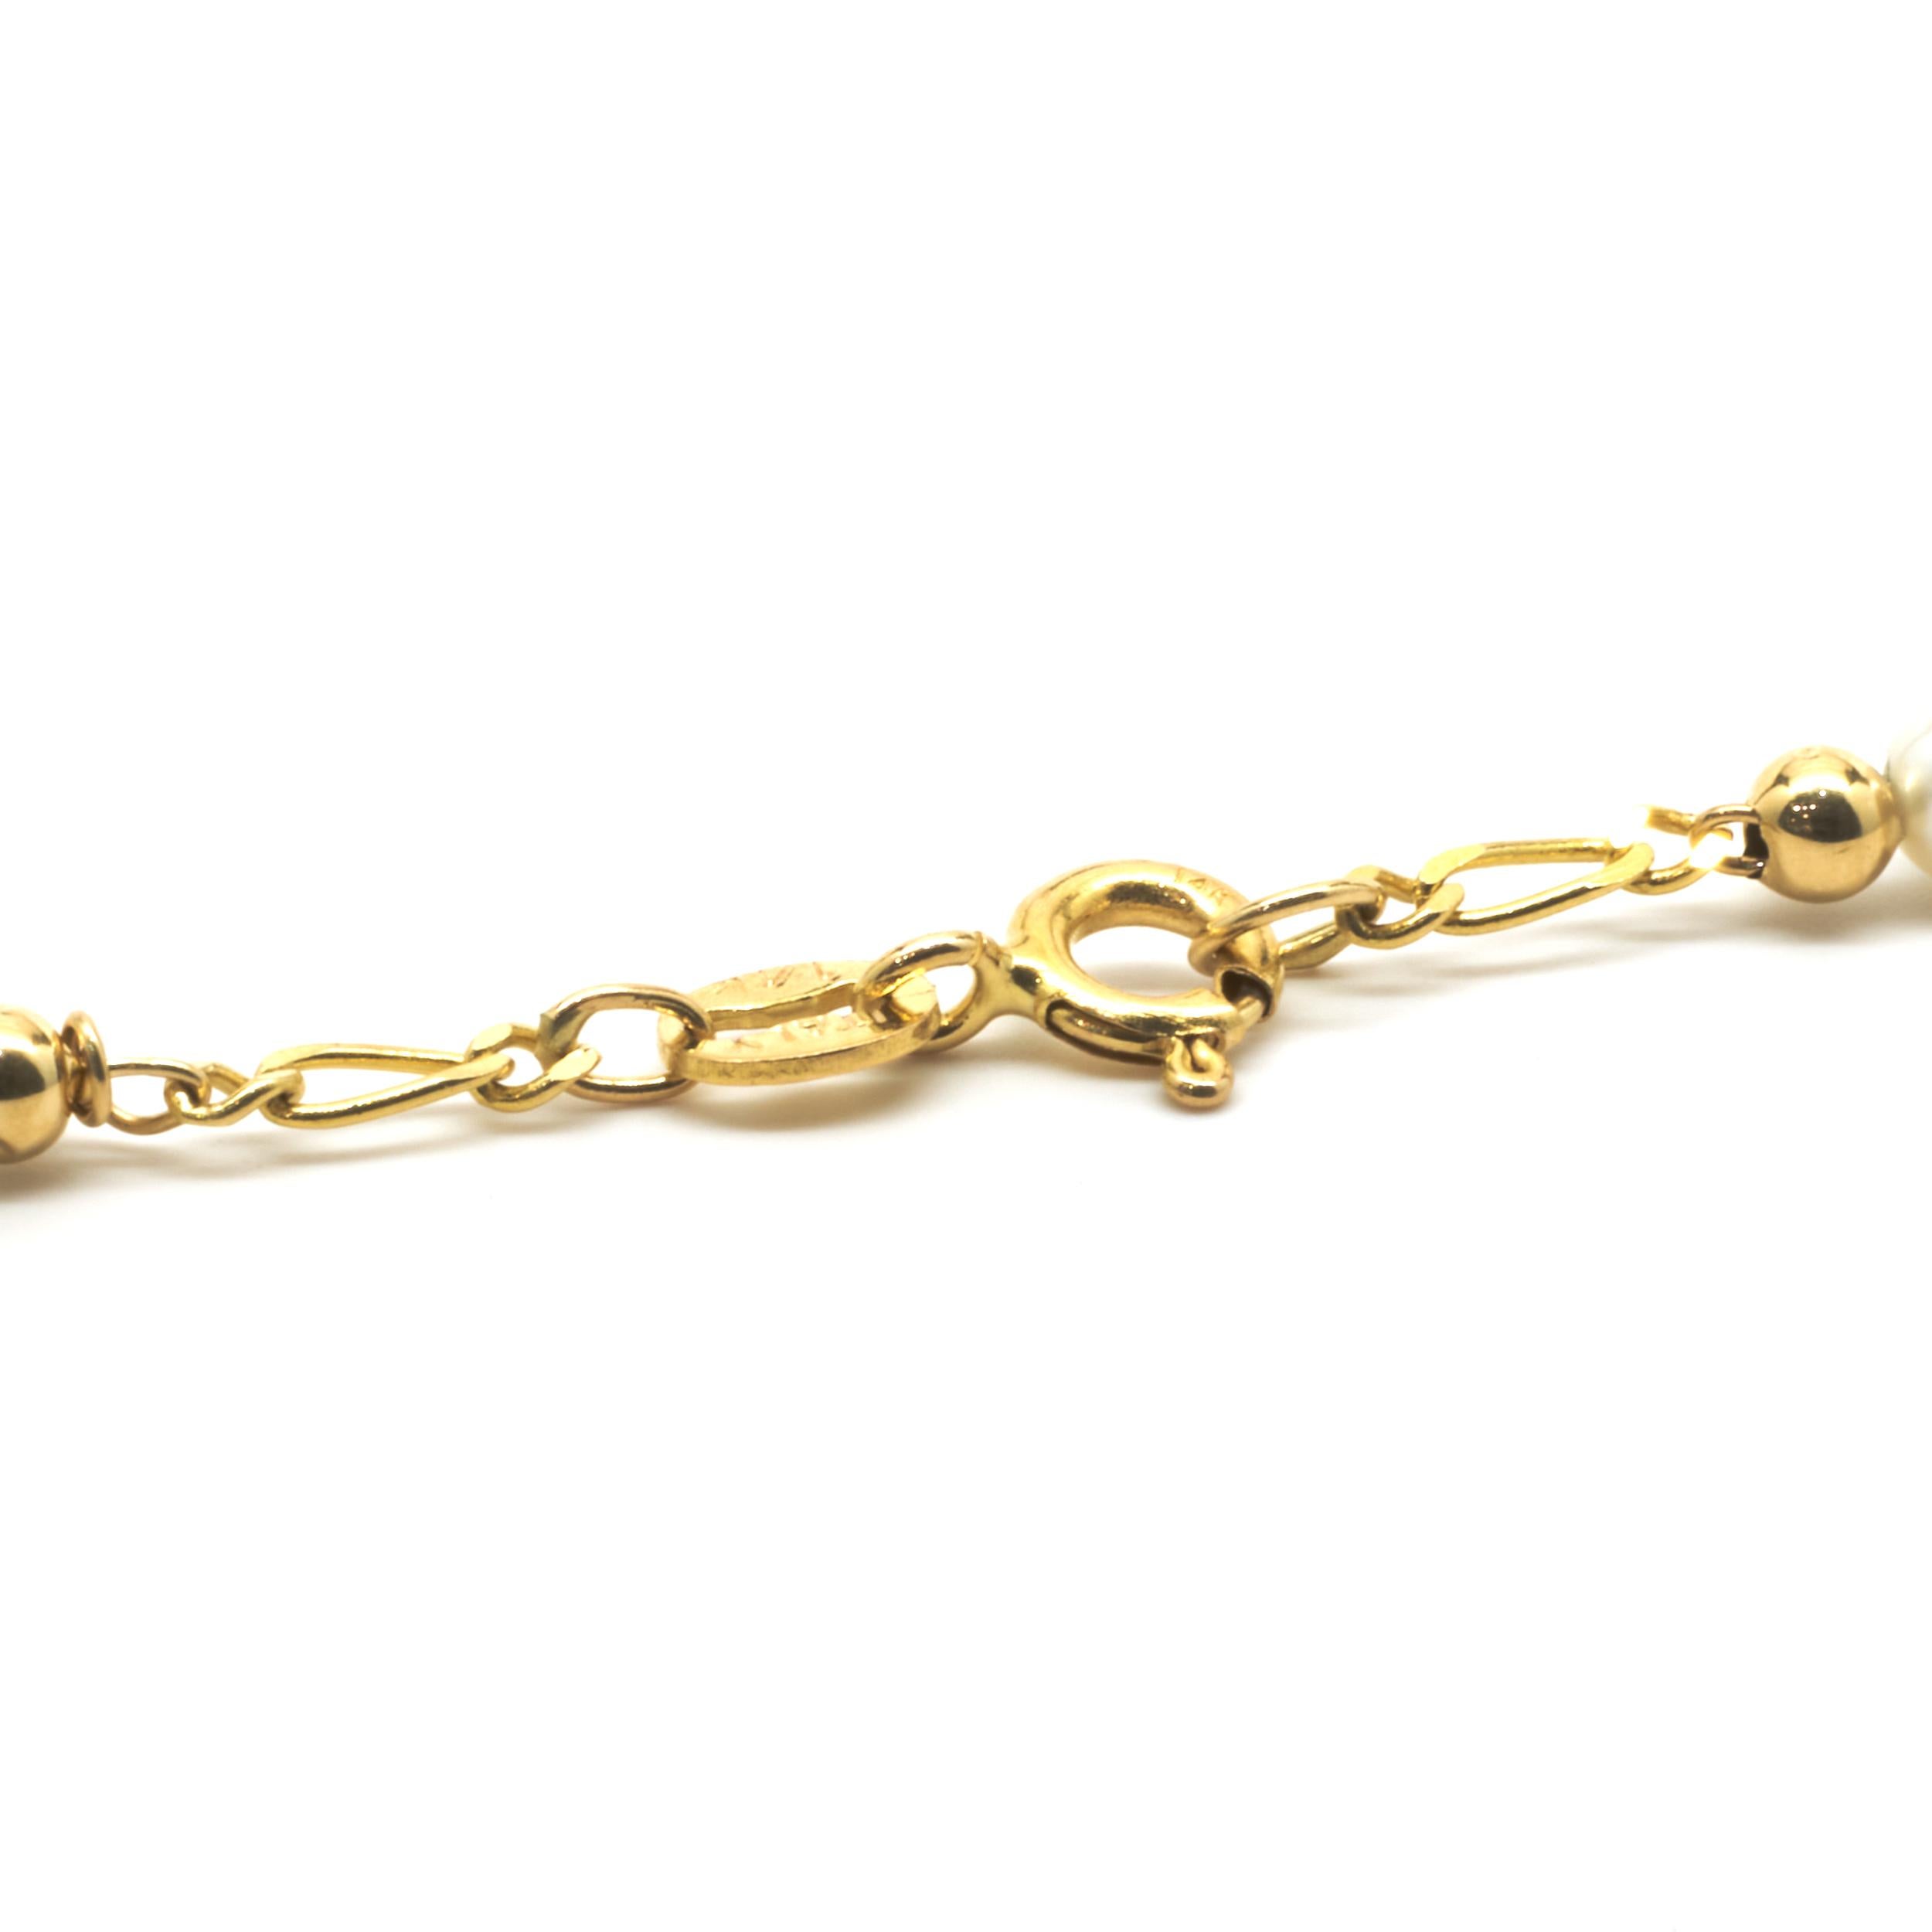 Designer: Custom
Material: 14K yellow gold
Dimensions: necklace measures 18-inches in length, 2.5-inch pearl drop
Weight: 7.48 grams
